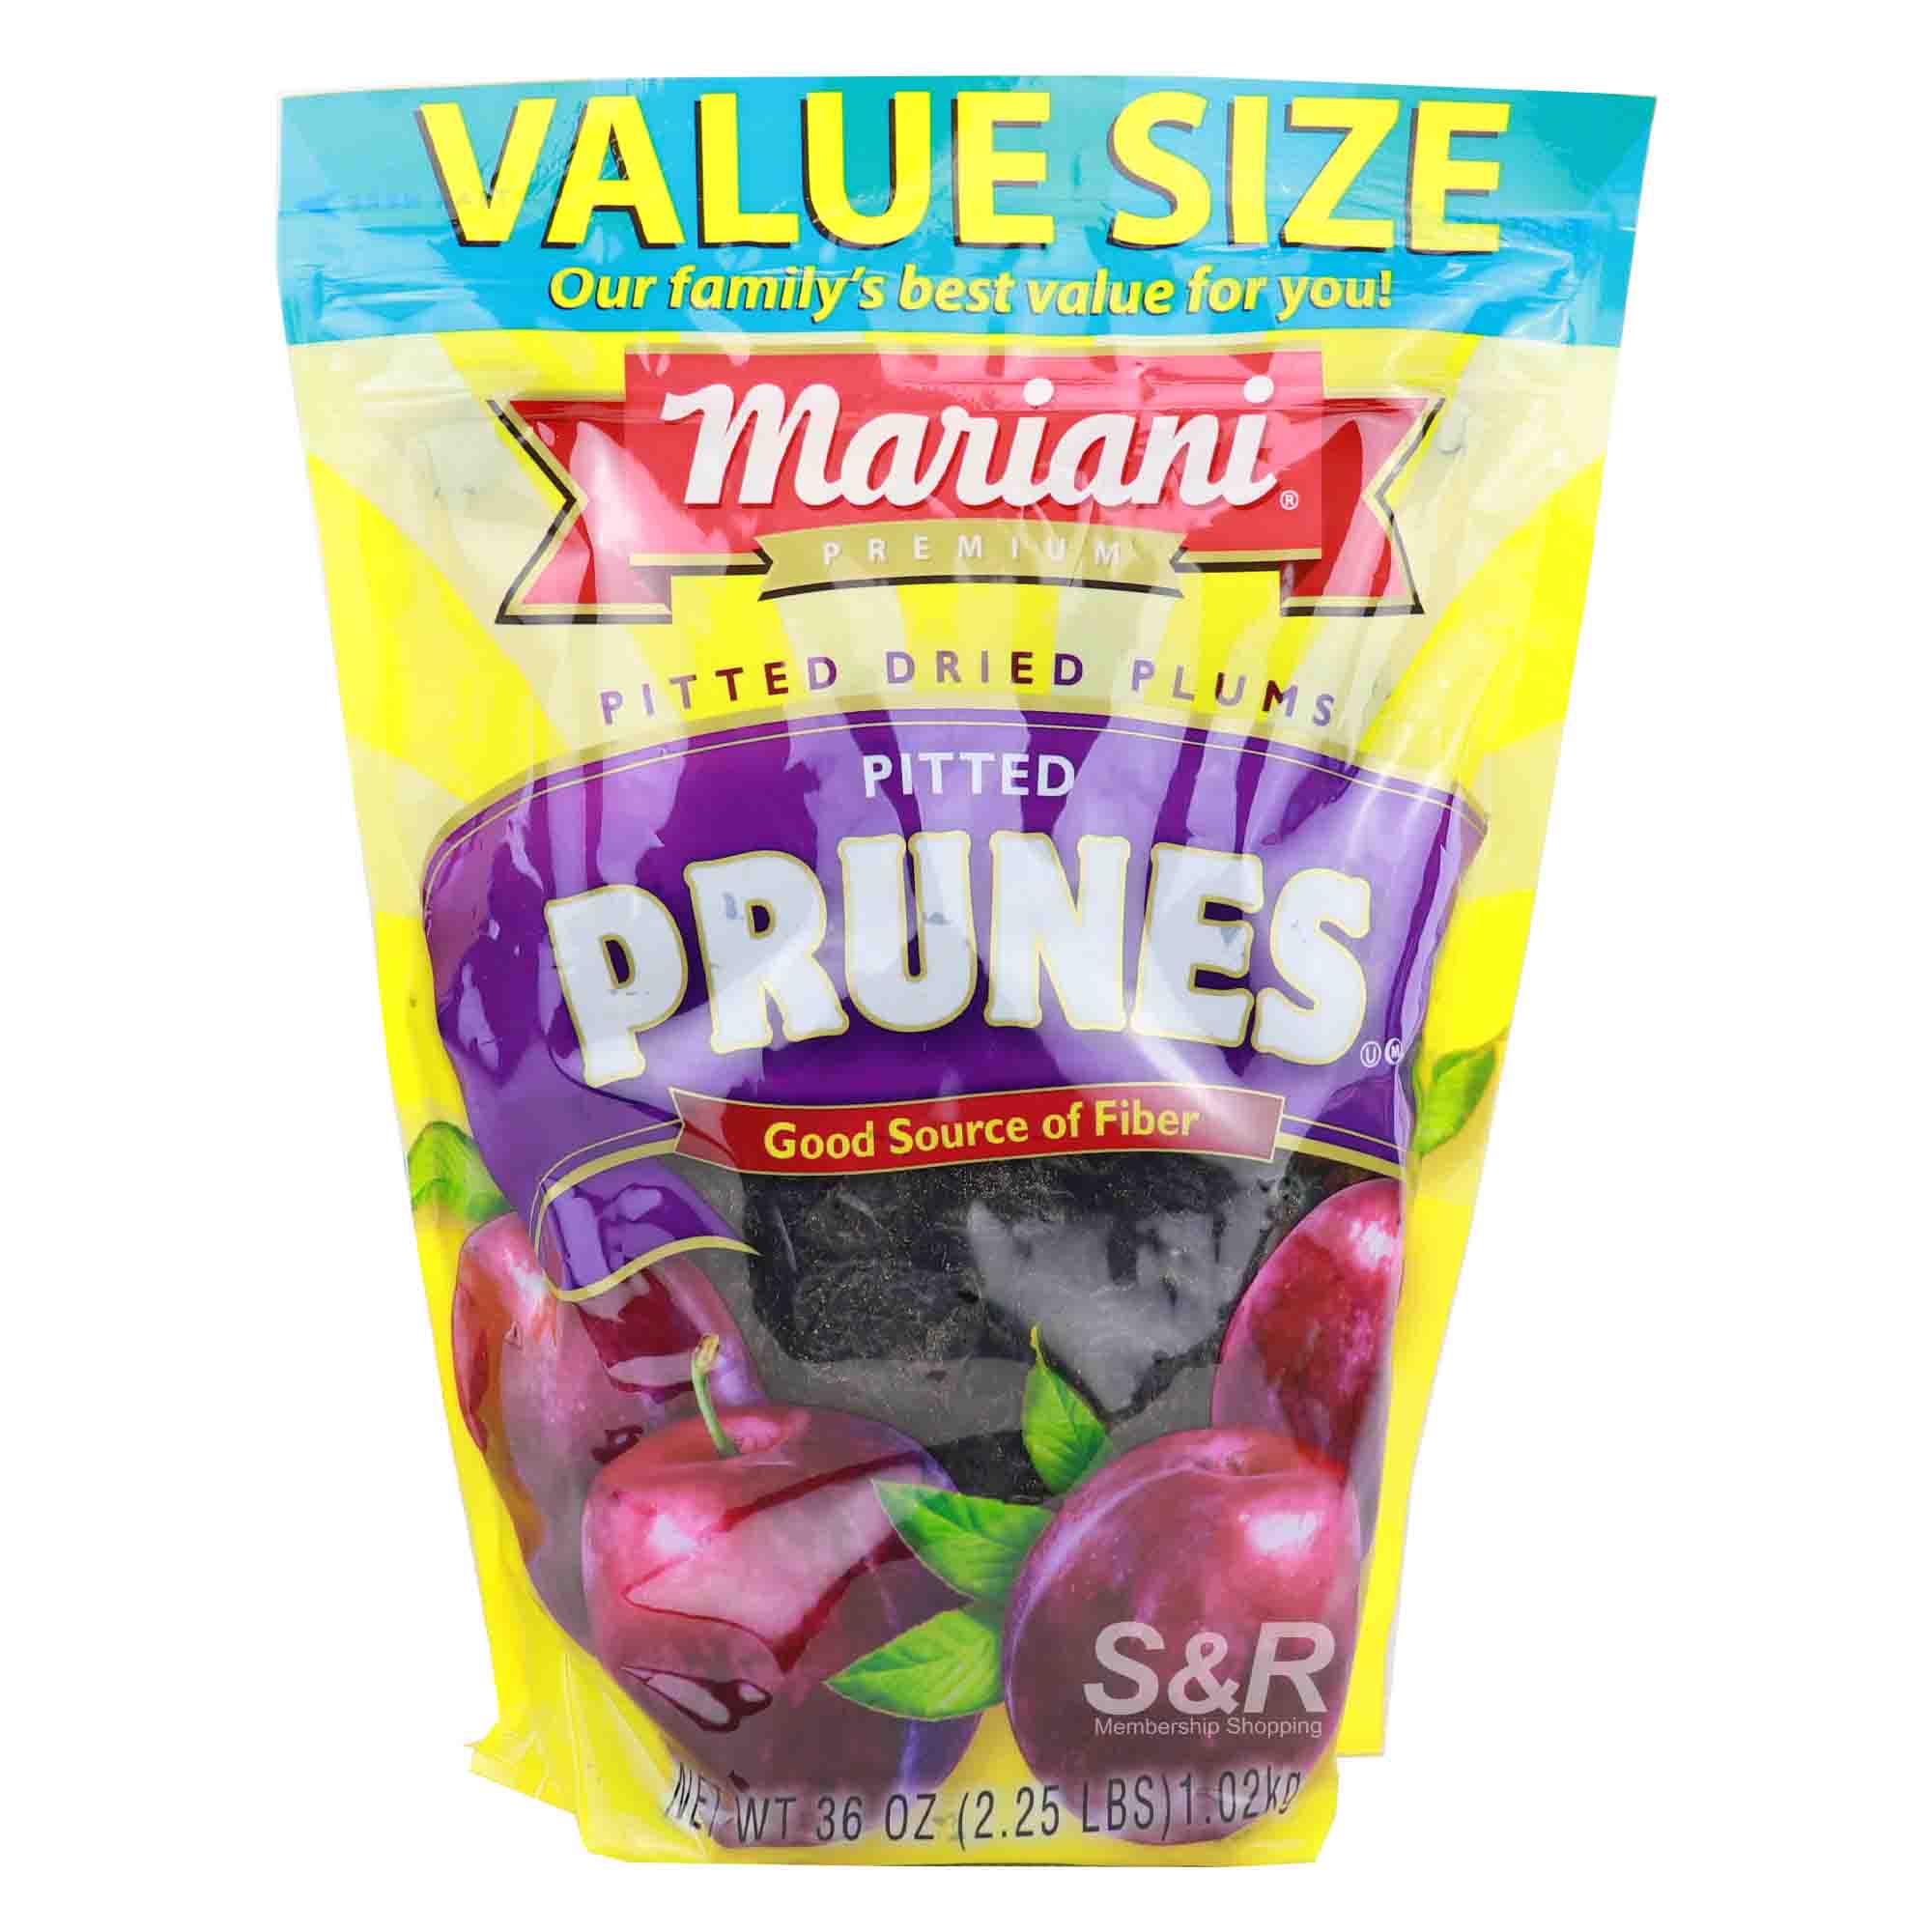 Mariani Premium Pitted Dried Plums 1.02kg